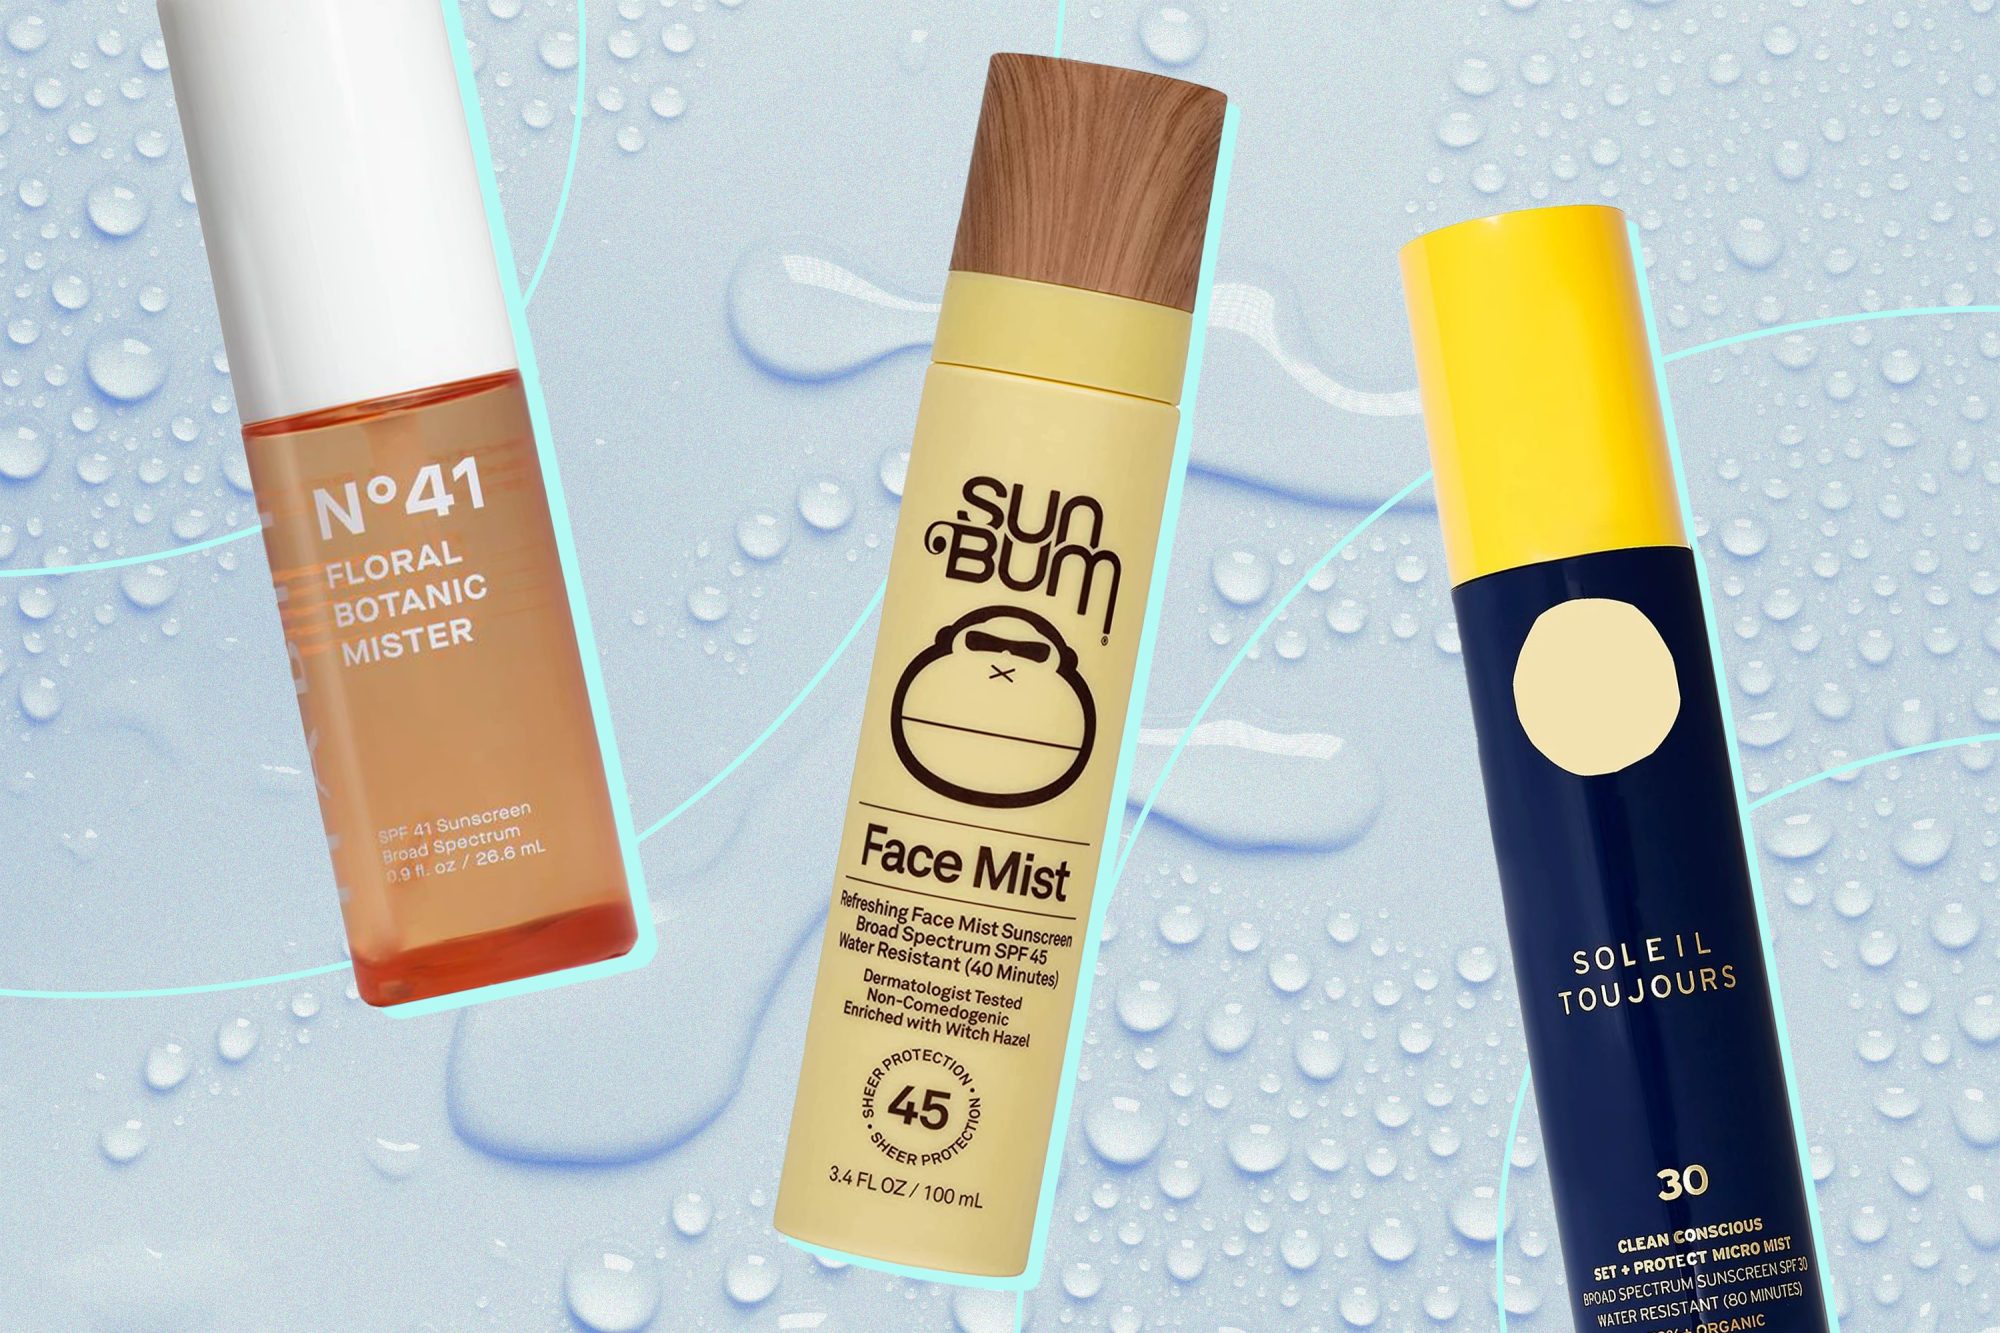 Top 10 Best Face Mists That Will Protect Your Make-Up and Your Skin from the Sun